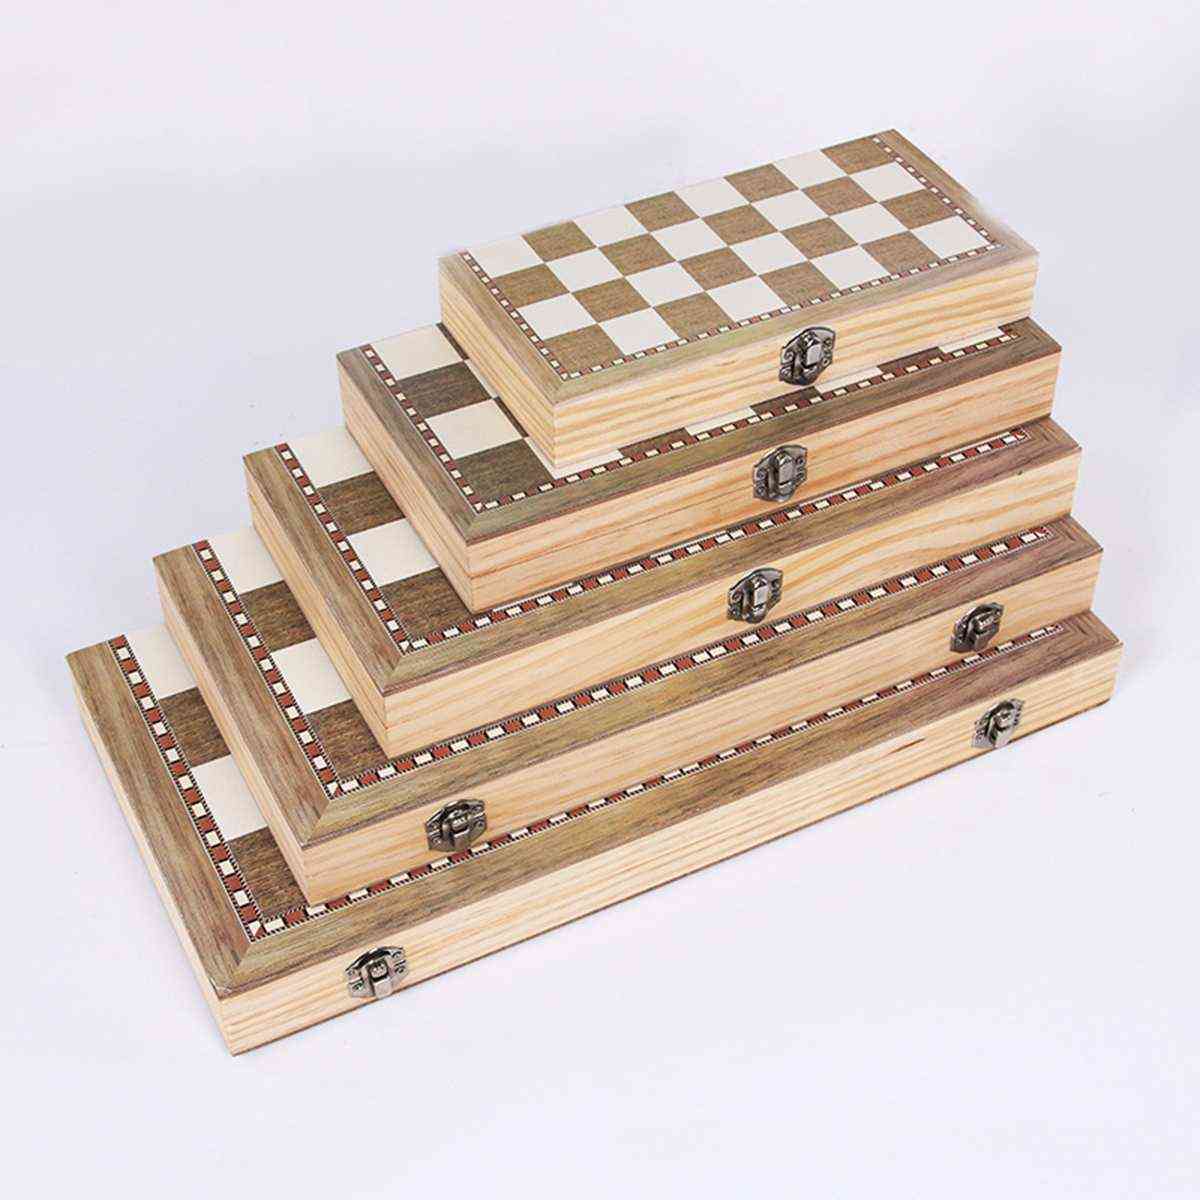 Foldable Wooden Chess Board Set, Travel Games Backgammon Checkers Toy